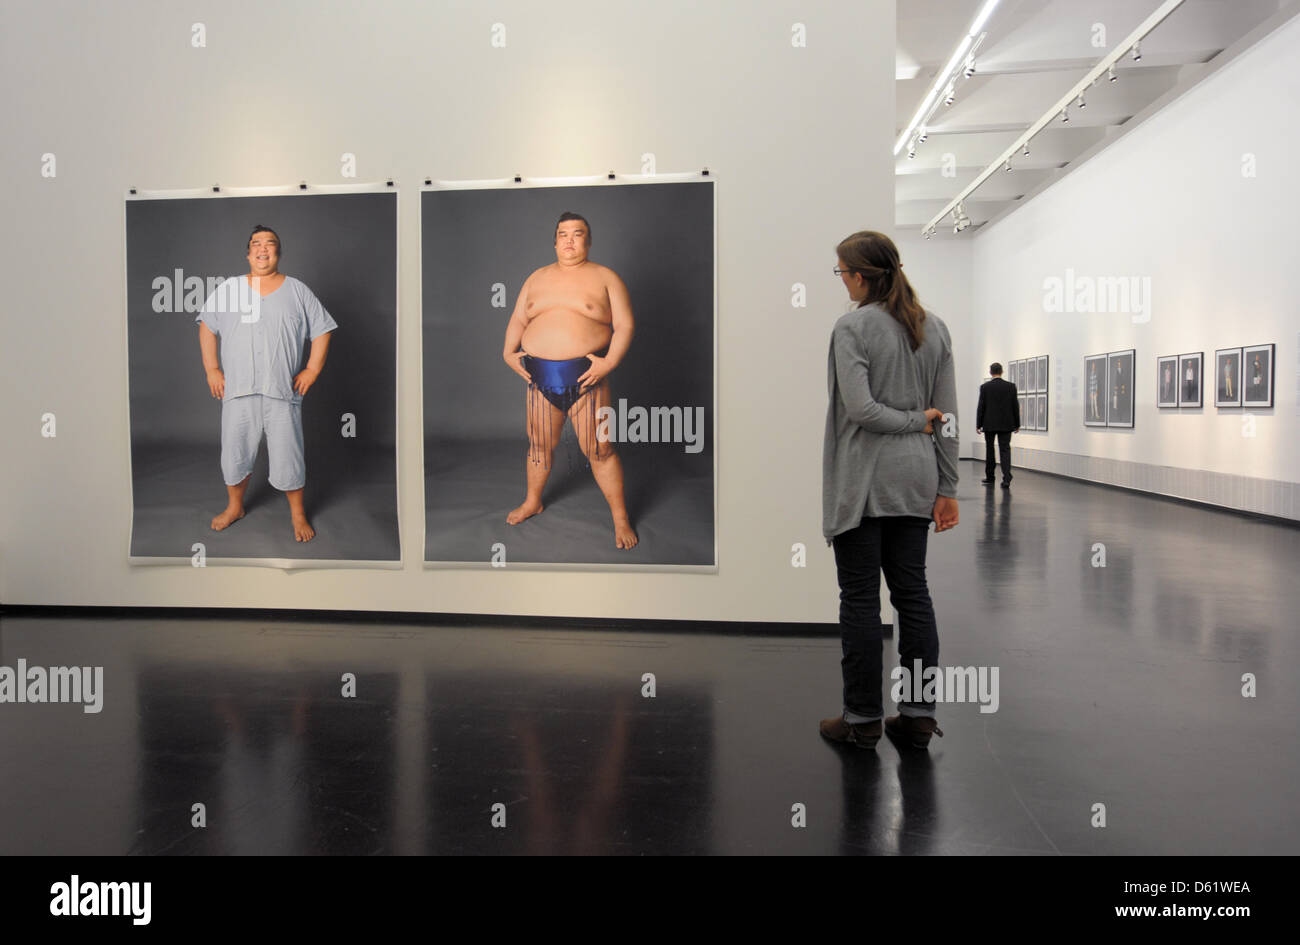 A woman vies photos of a Japanese sumo wrestler during the new exhibition 'Kleider machen Leute' ('Clothes make the man') of photographer Herlinde Koelbl in Dresden, Germany, 03 May 2012. Koelbl's exhibition at the German Hygiene Museum Dresden showing people in casual and professional clothing is open until 29 July 2012.  Photo: MATTHIAS HIEKEL Stock Photo